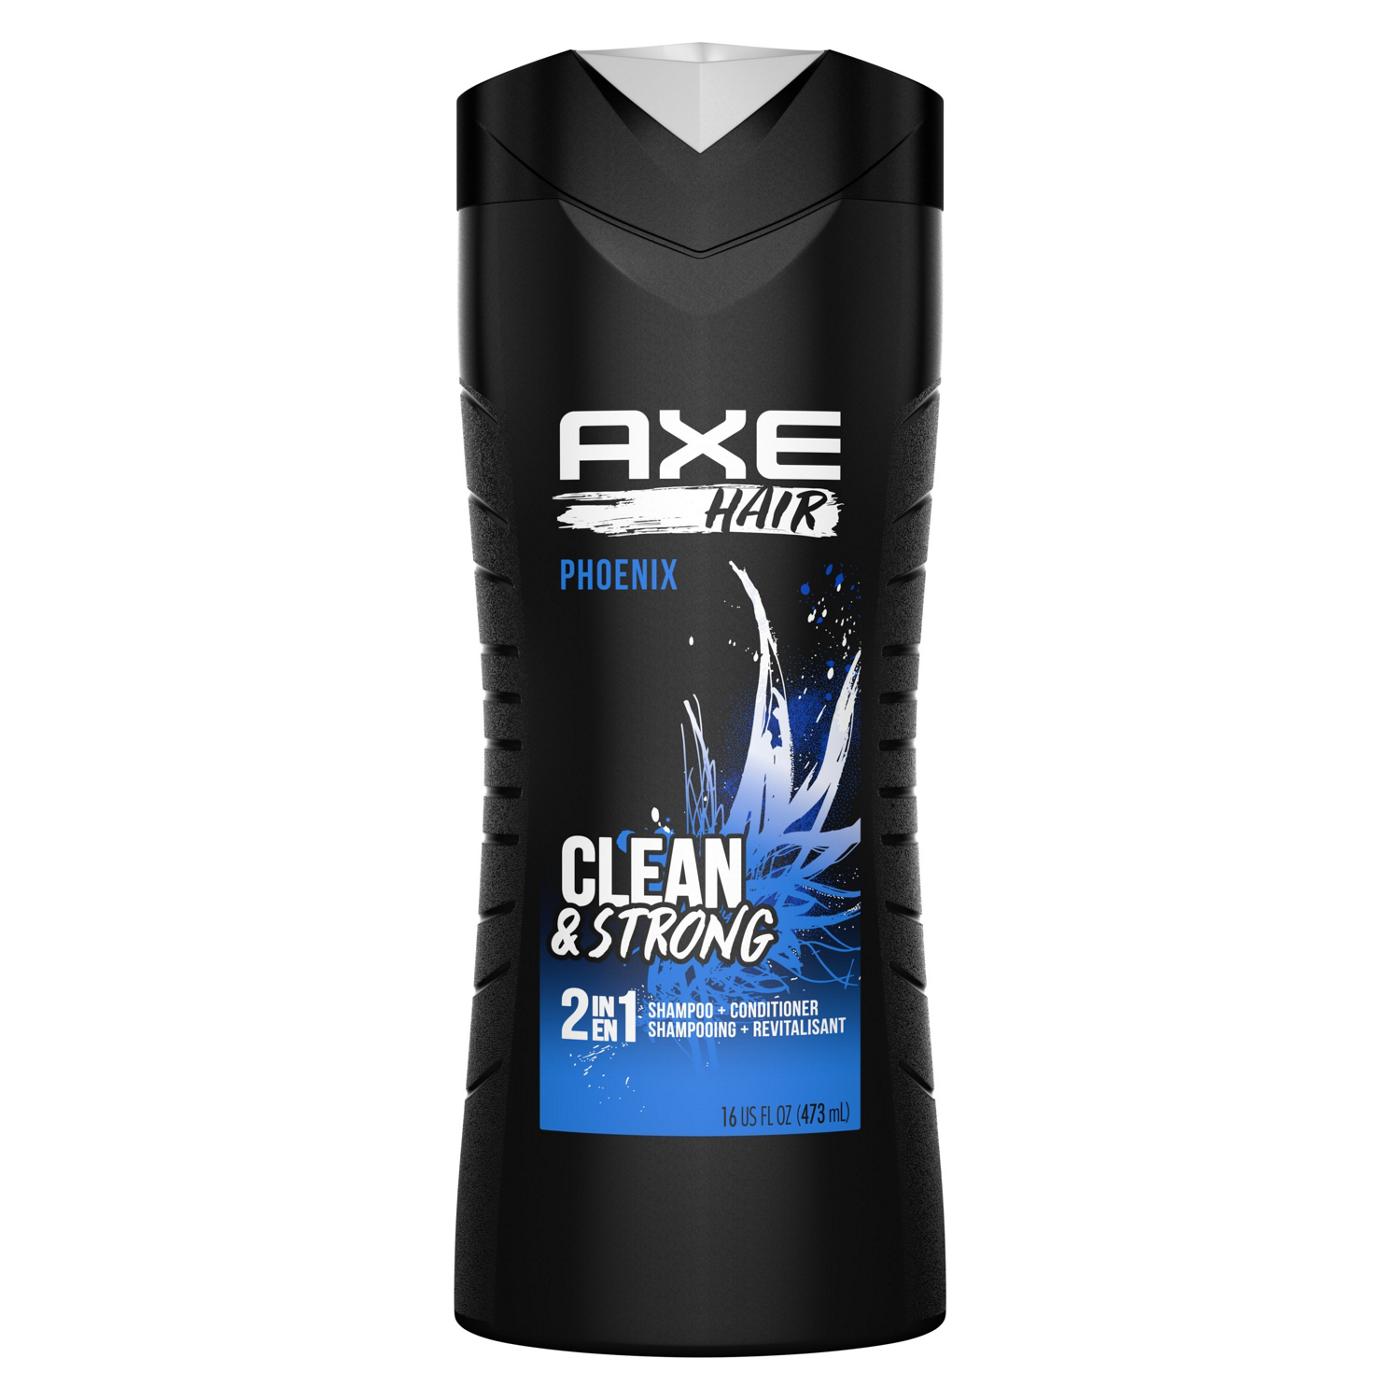 AXE Hair 2 in 1 Shampoo + Conditioner - Phoenix; image 1 of 9